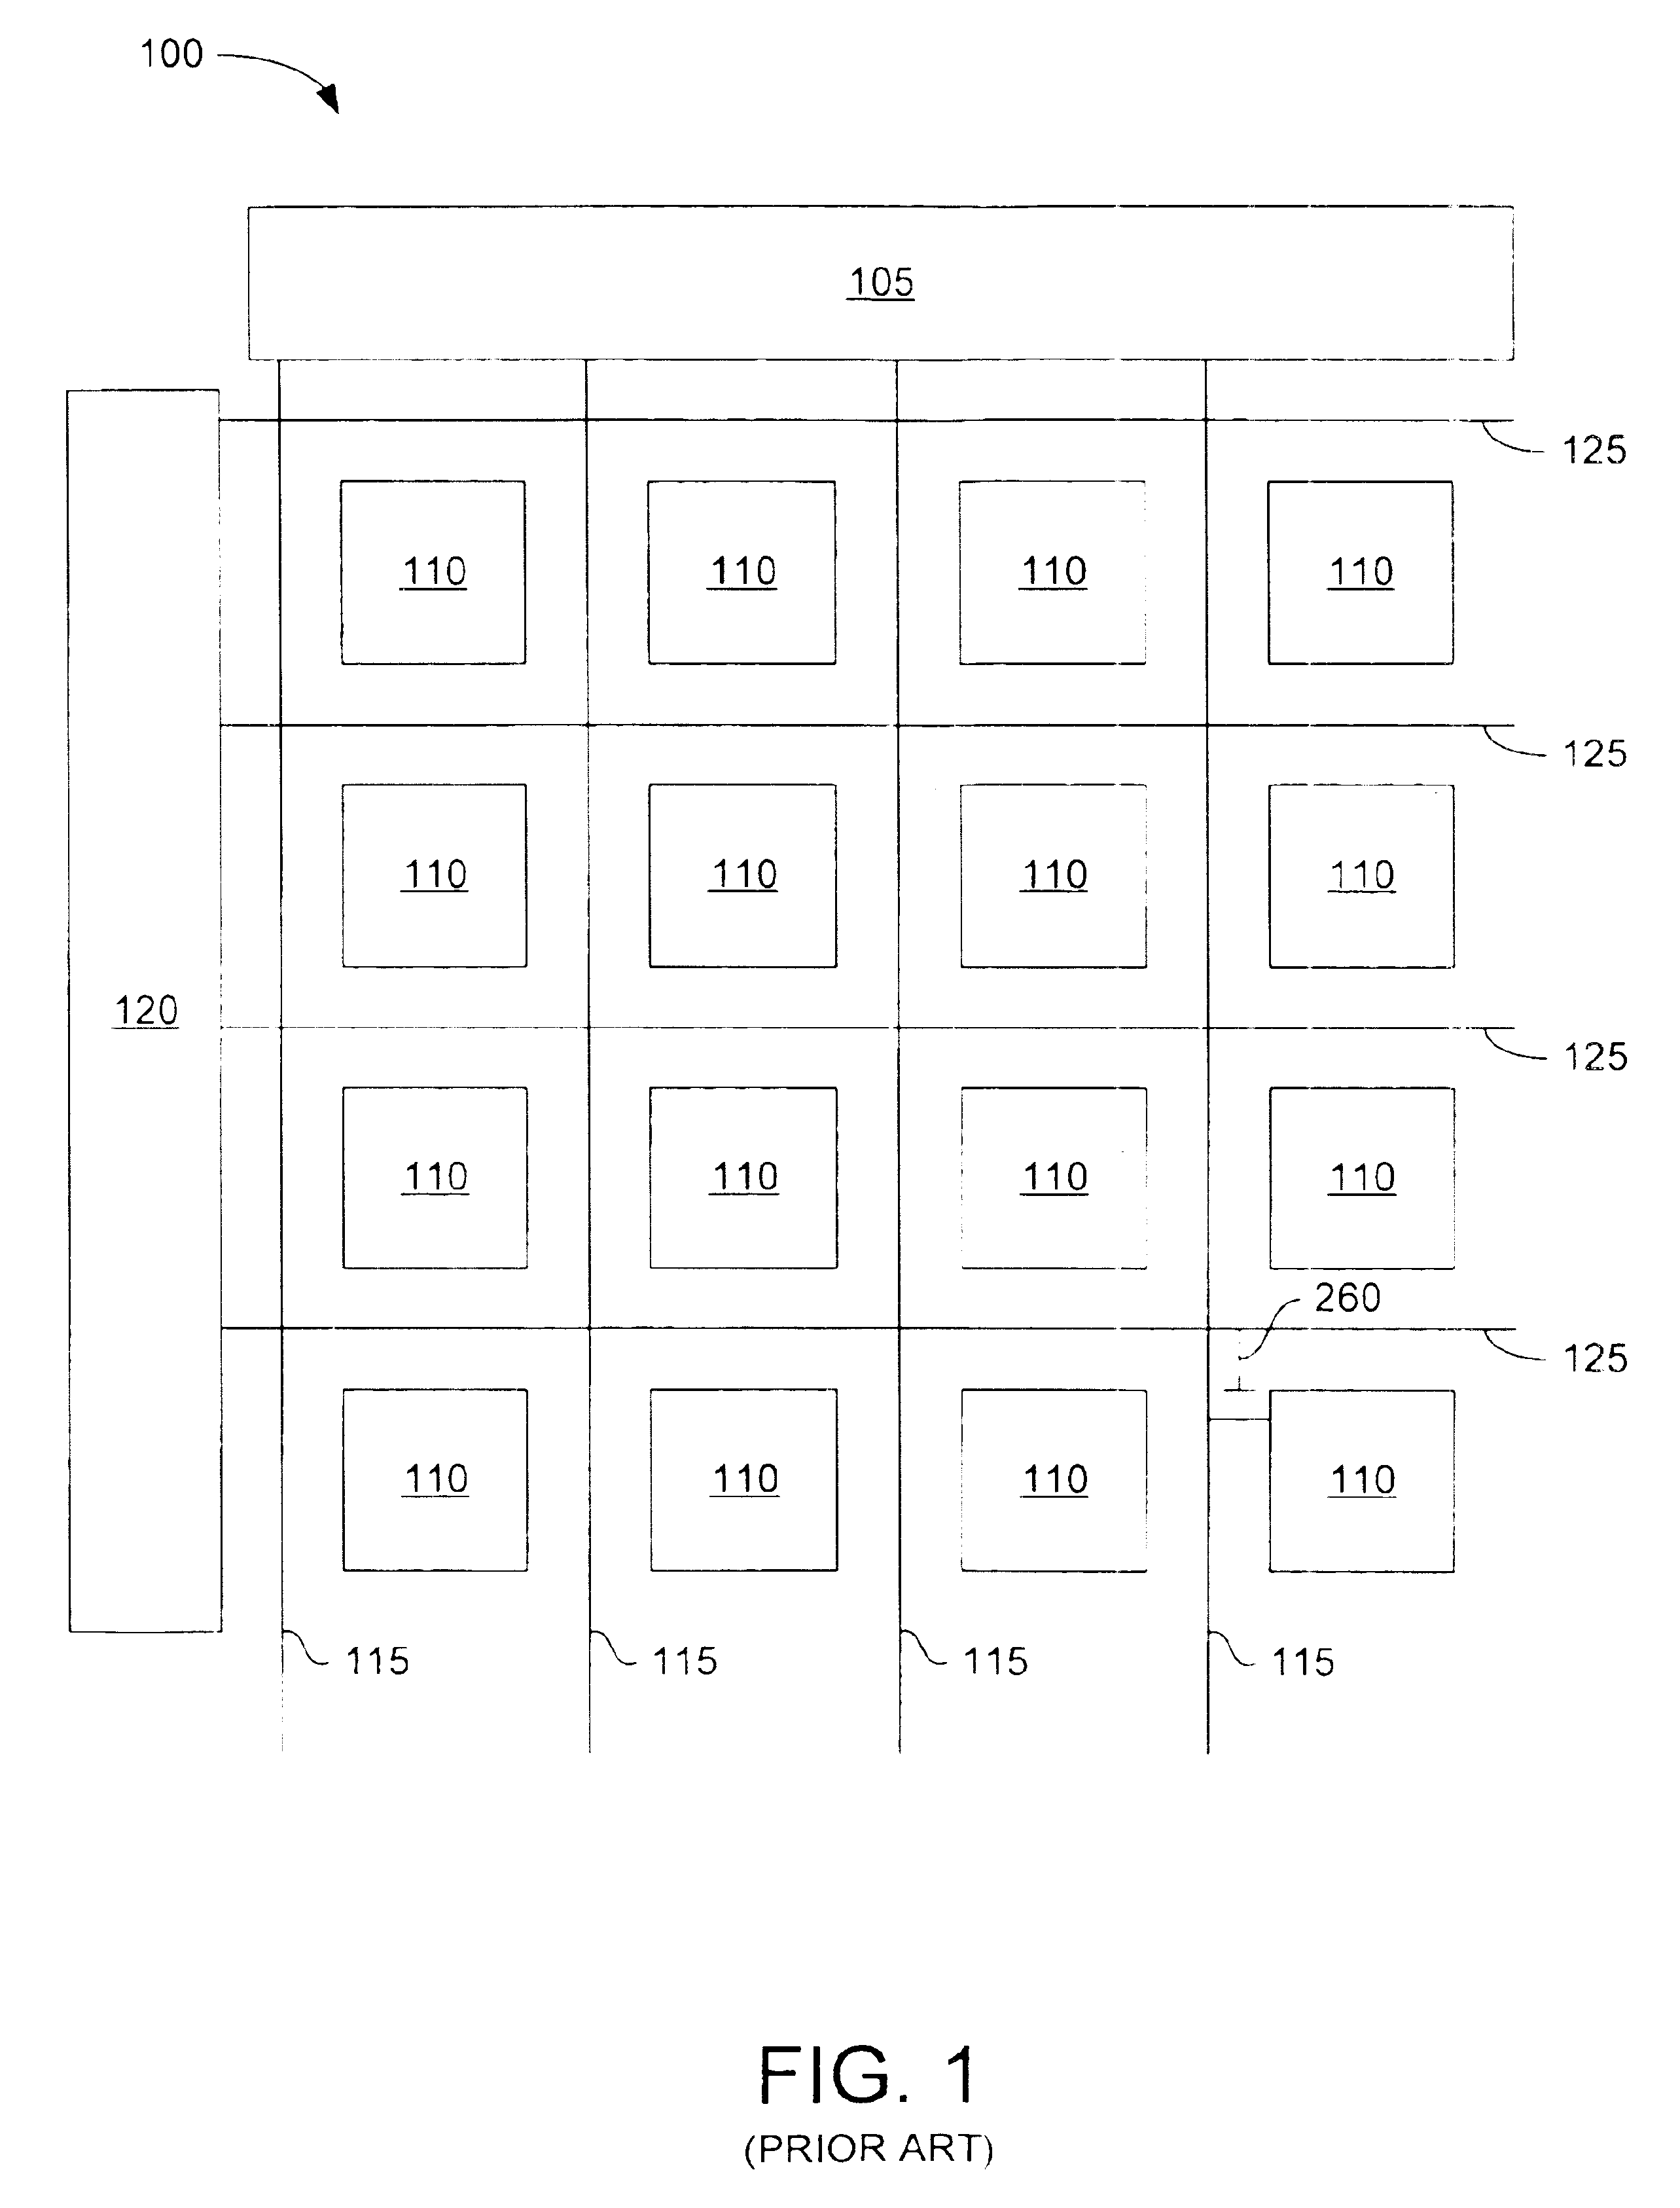 Methods and systems employing infrared thermography for defect detection and analysis